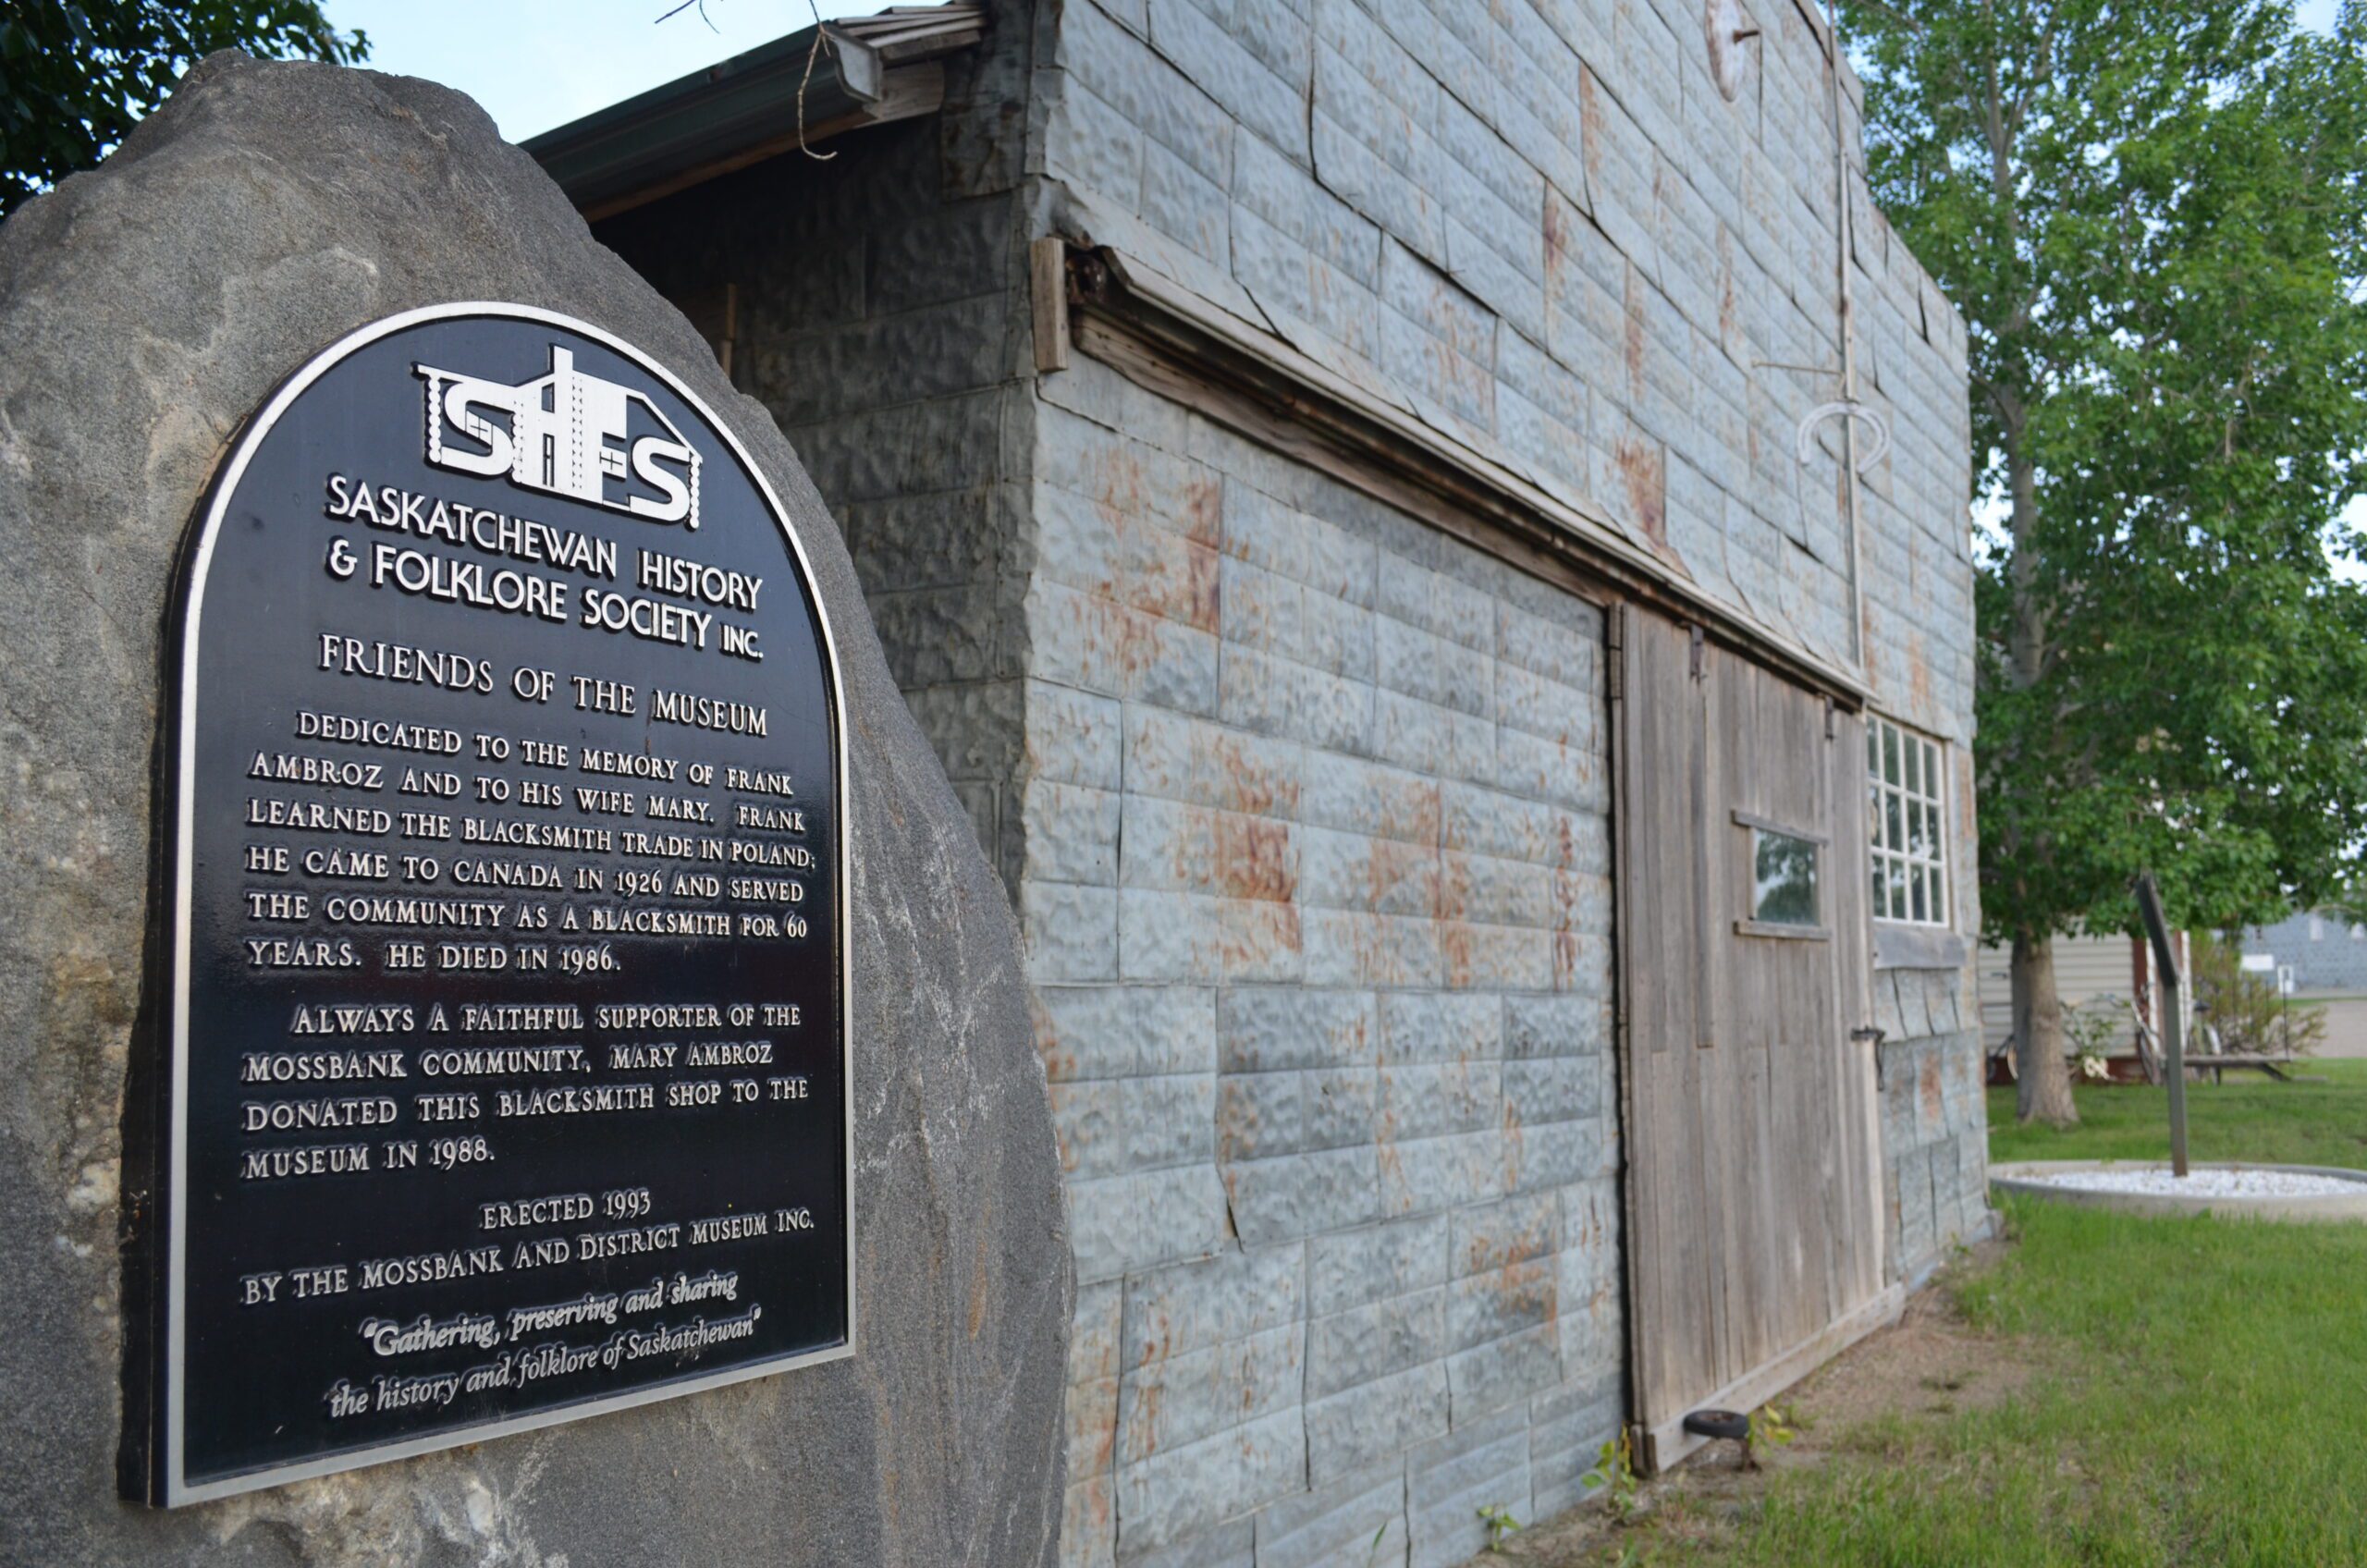 Plaque on museum about SK Historty & Folklore Society